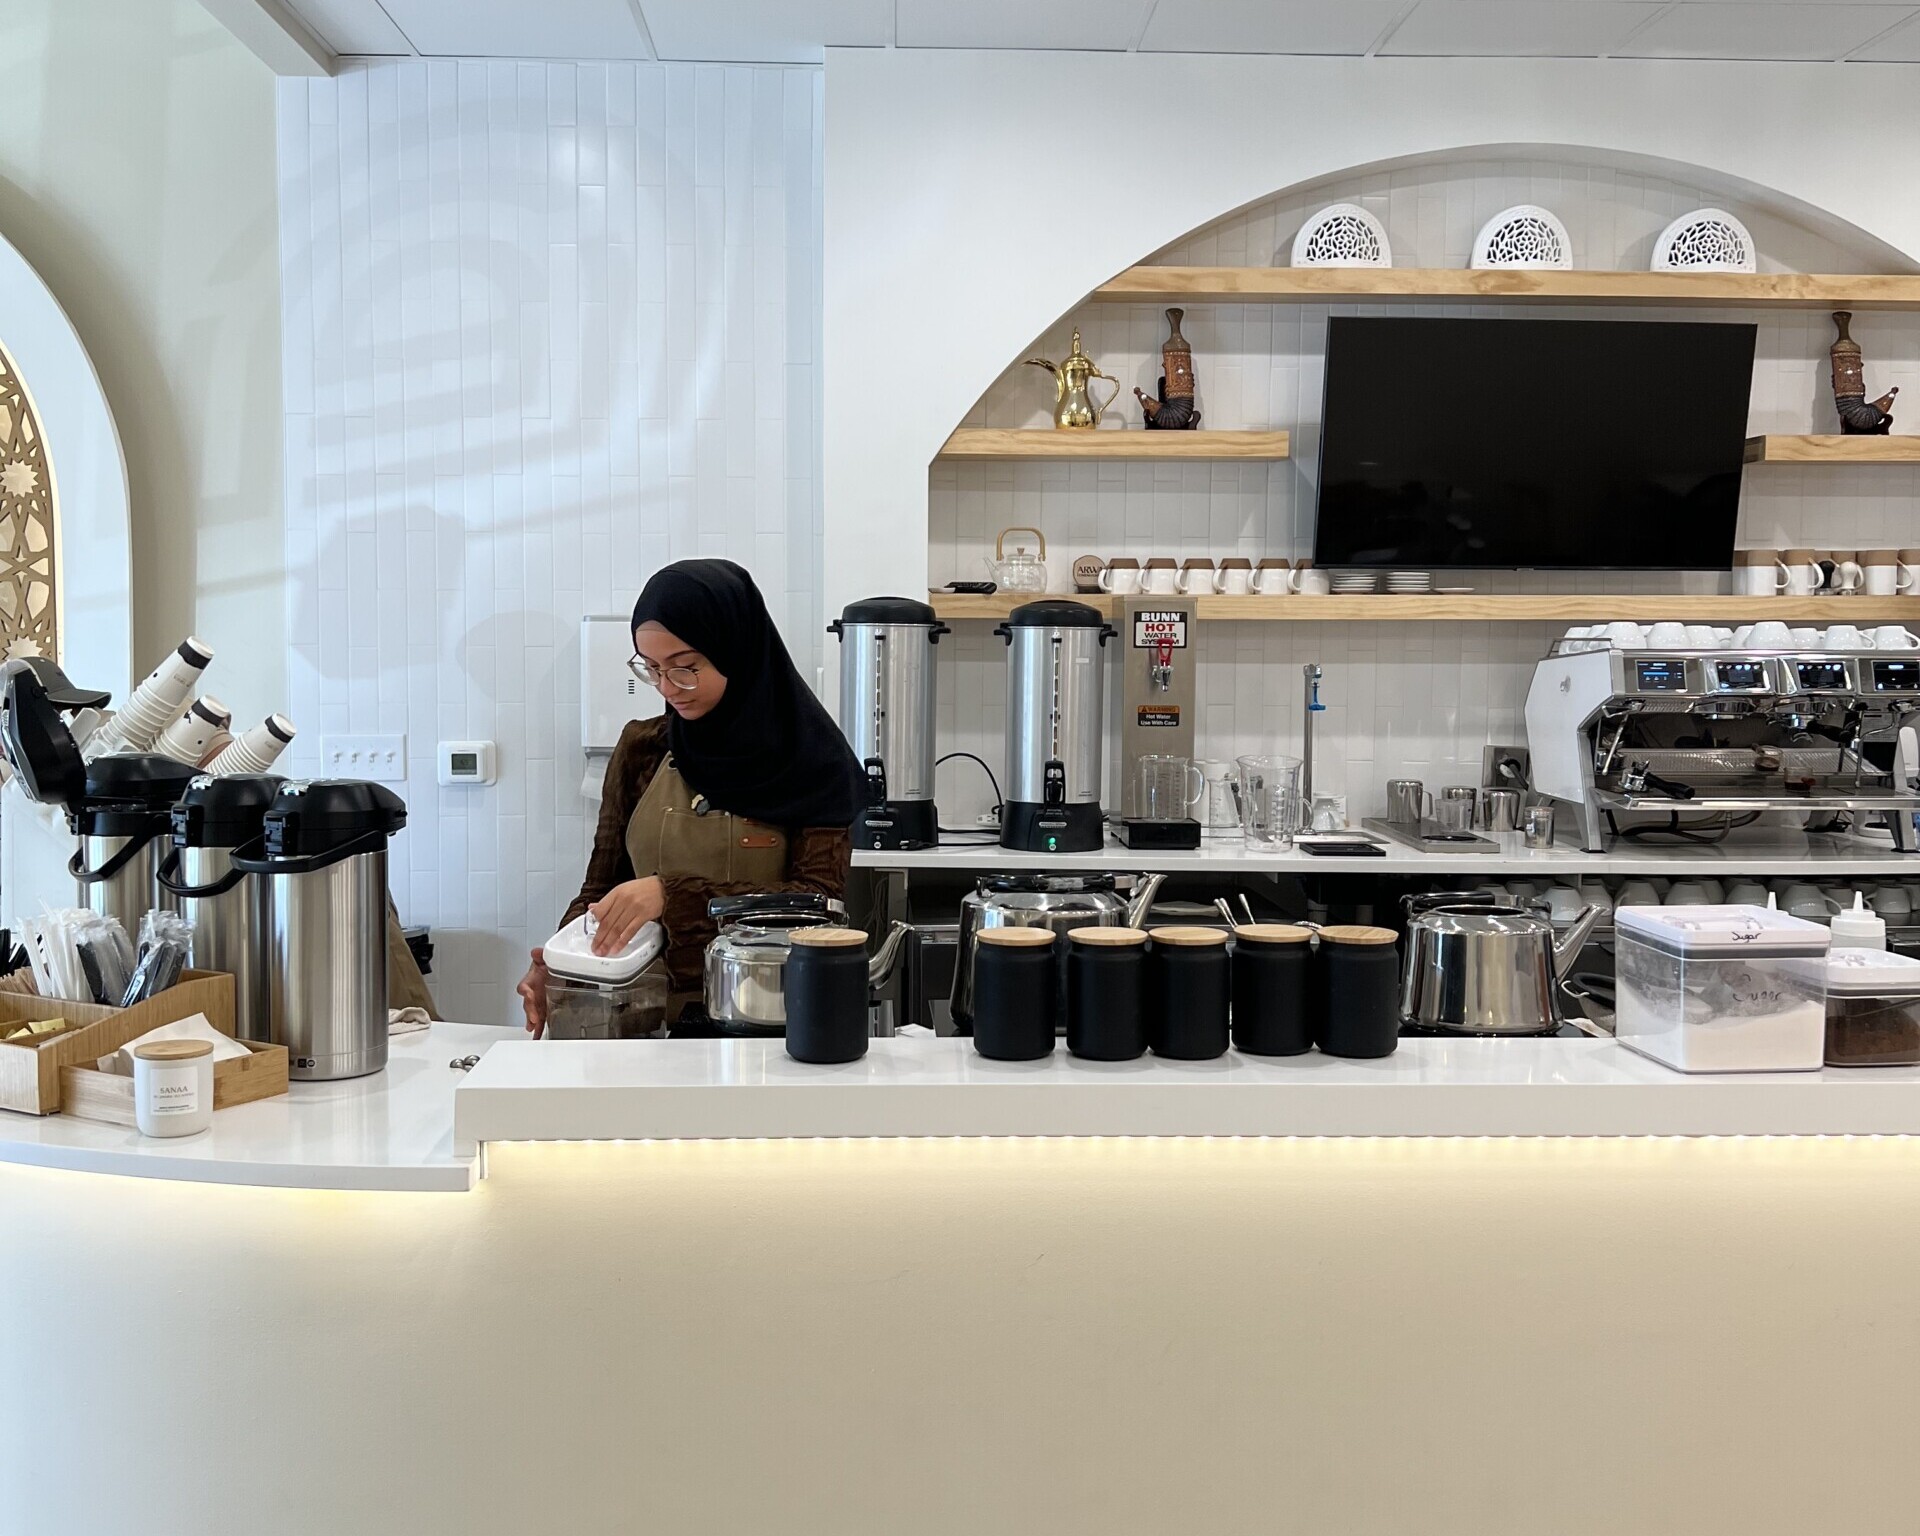 Yemenite coffee shops have made a home in North Texas